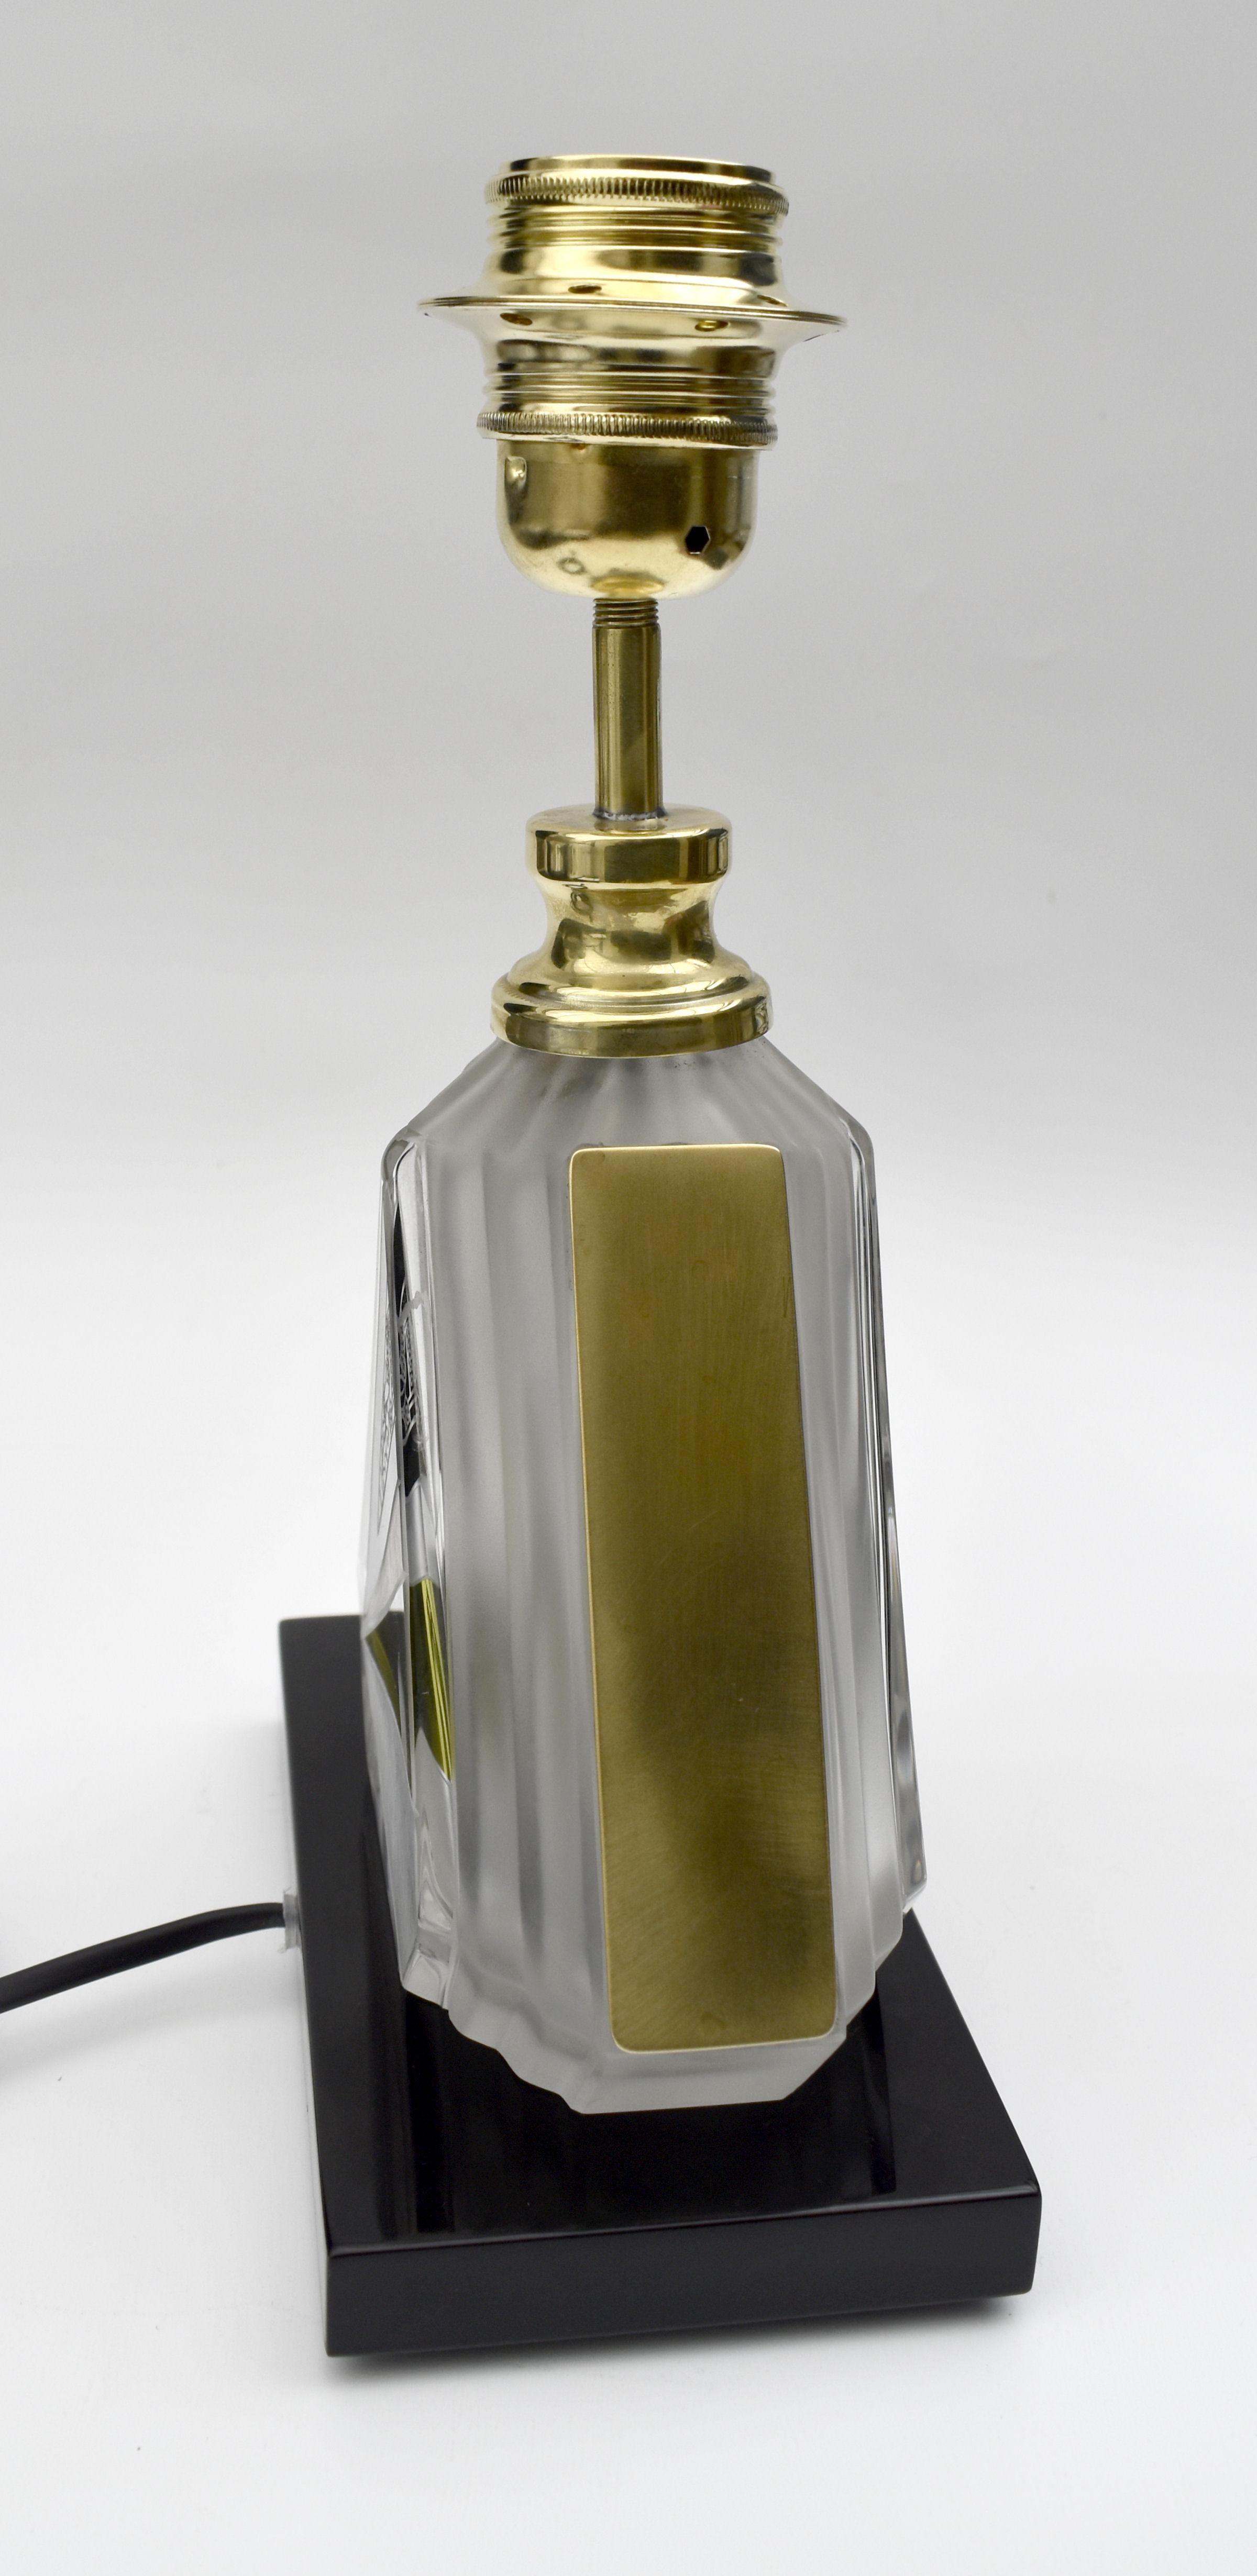 Etched Art Deco Iconic Glass Table Lamp By Karl Palda, c1930 For Sale